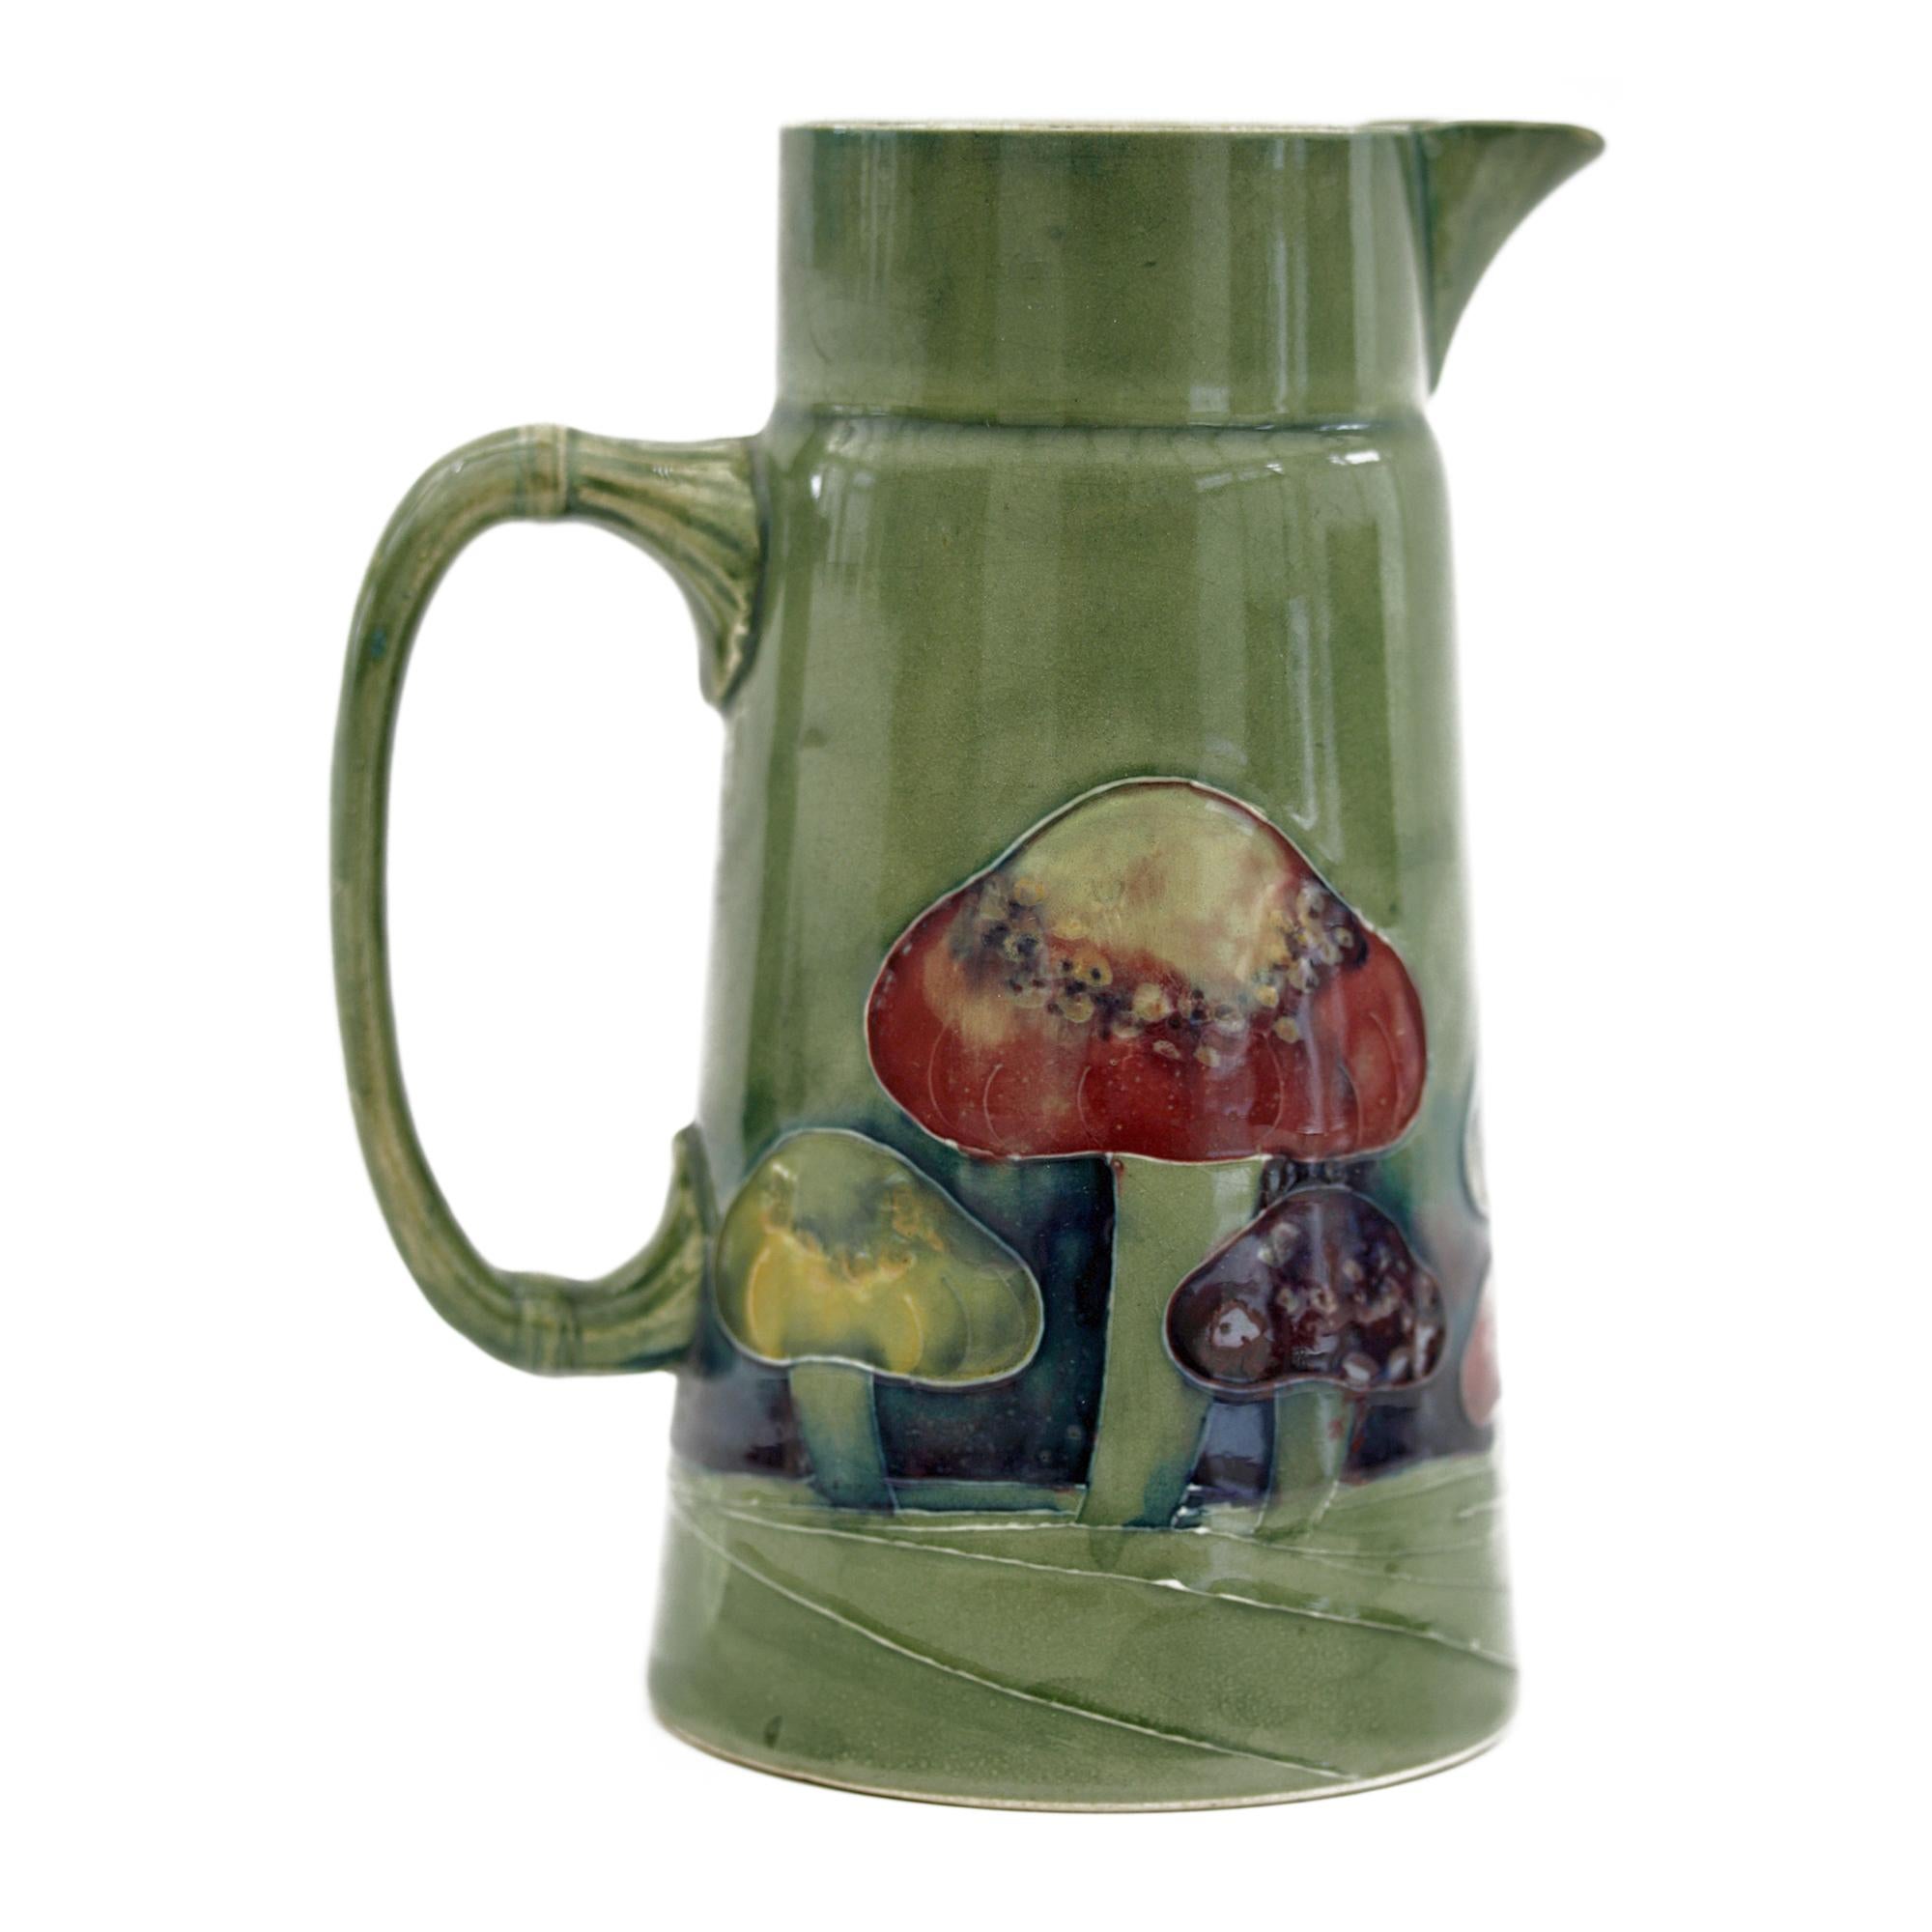 A rare William Moorcroft Claremont pattern jug of tall conical shape with a moulded handle and funnel shaped top with large pouring spout. The jug is hand decorated with tubelined mushrooms in streaked blue, red and yellow glazes on a green ground.